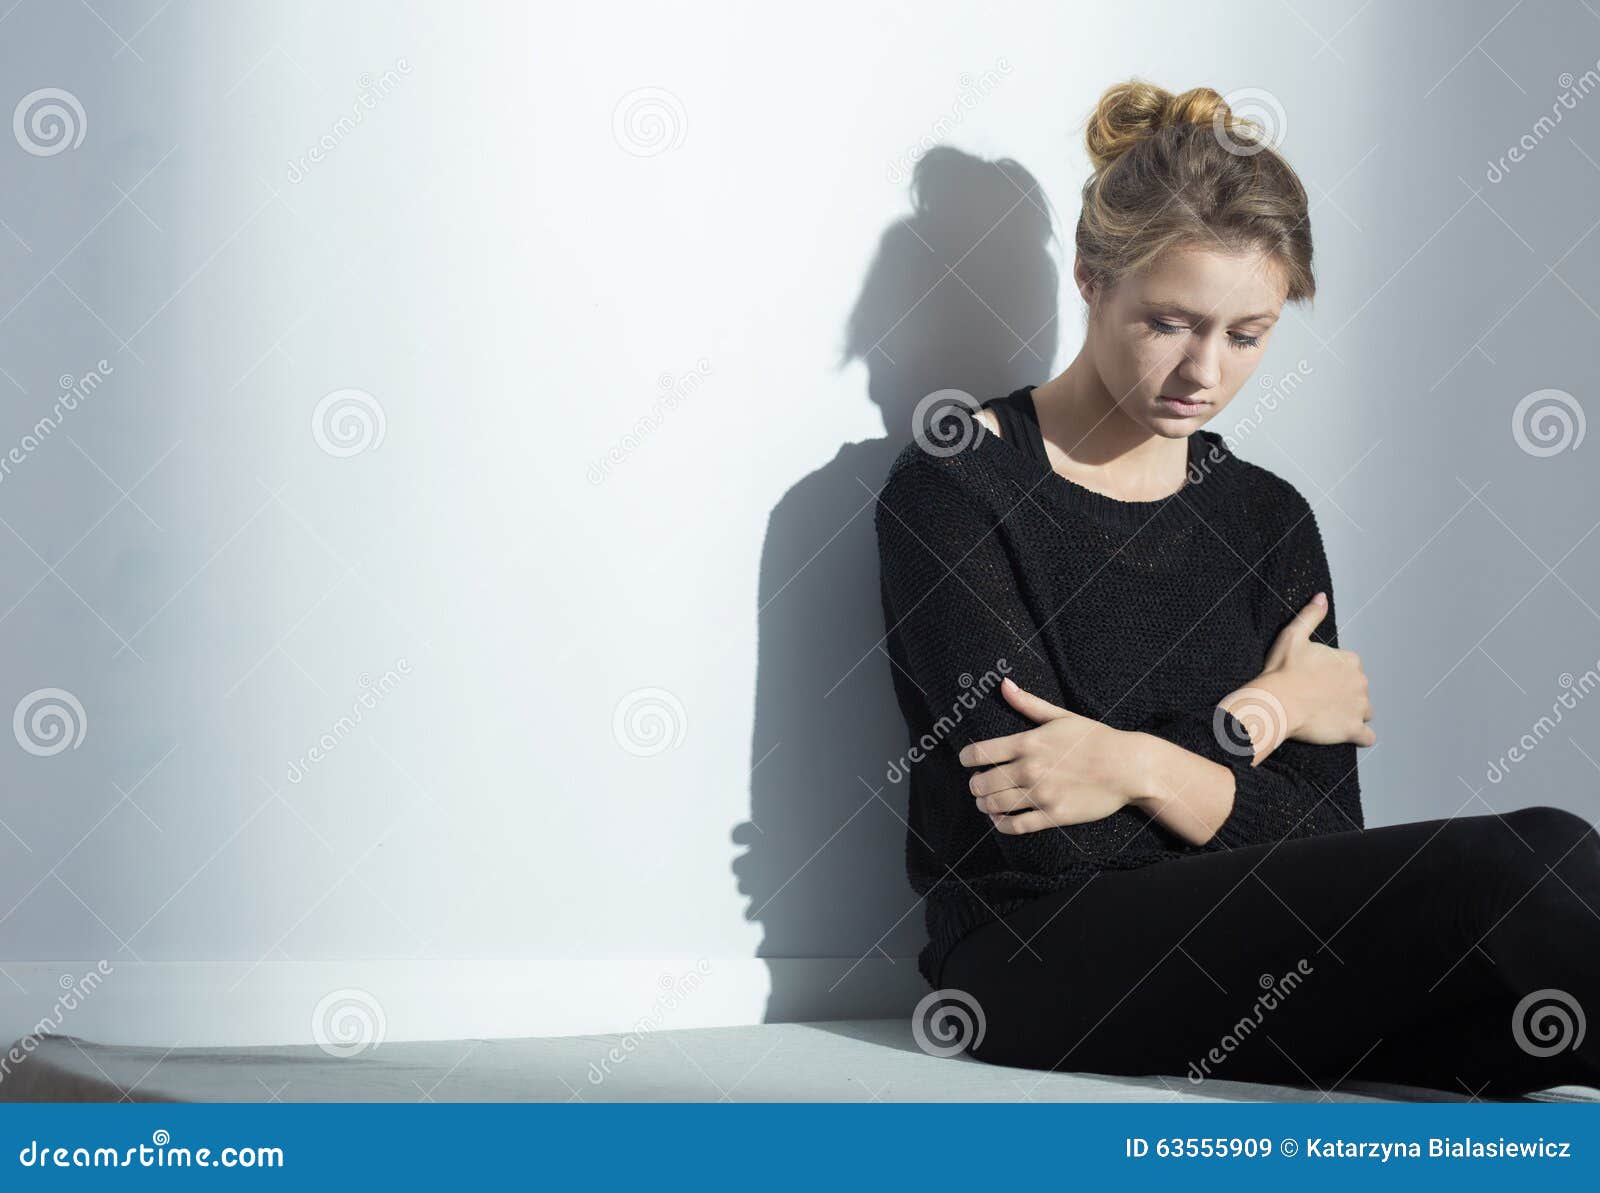 lonely woman with anorexia nervosa